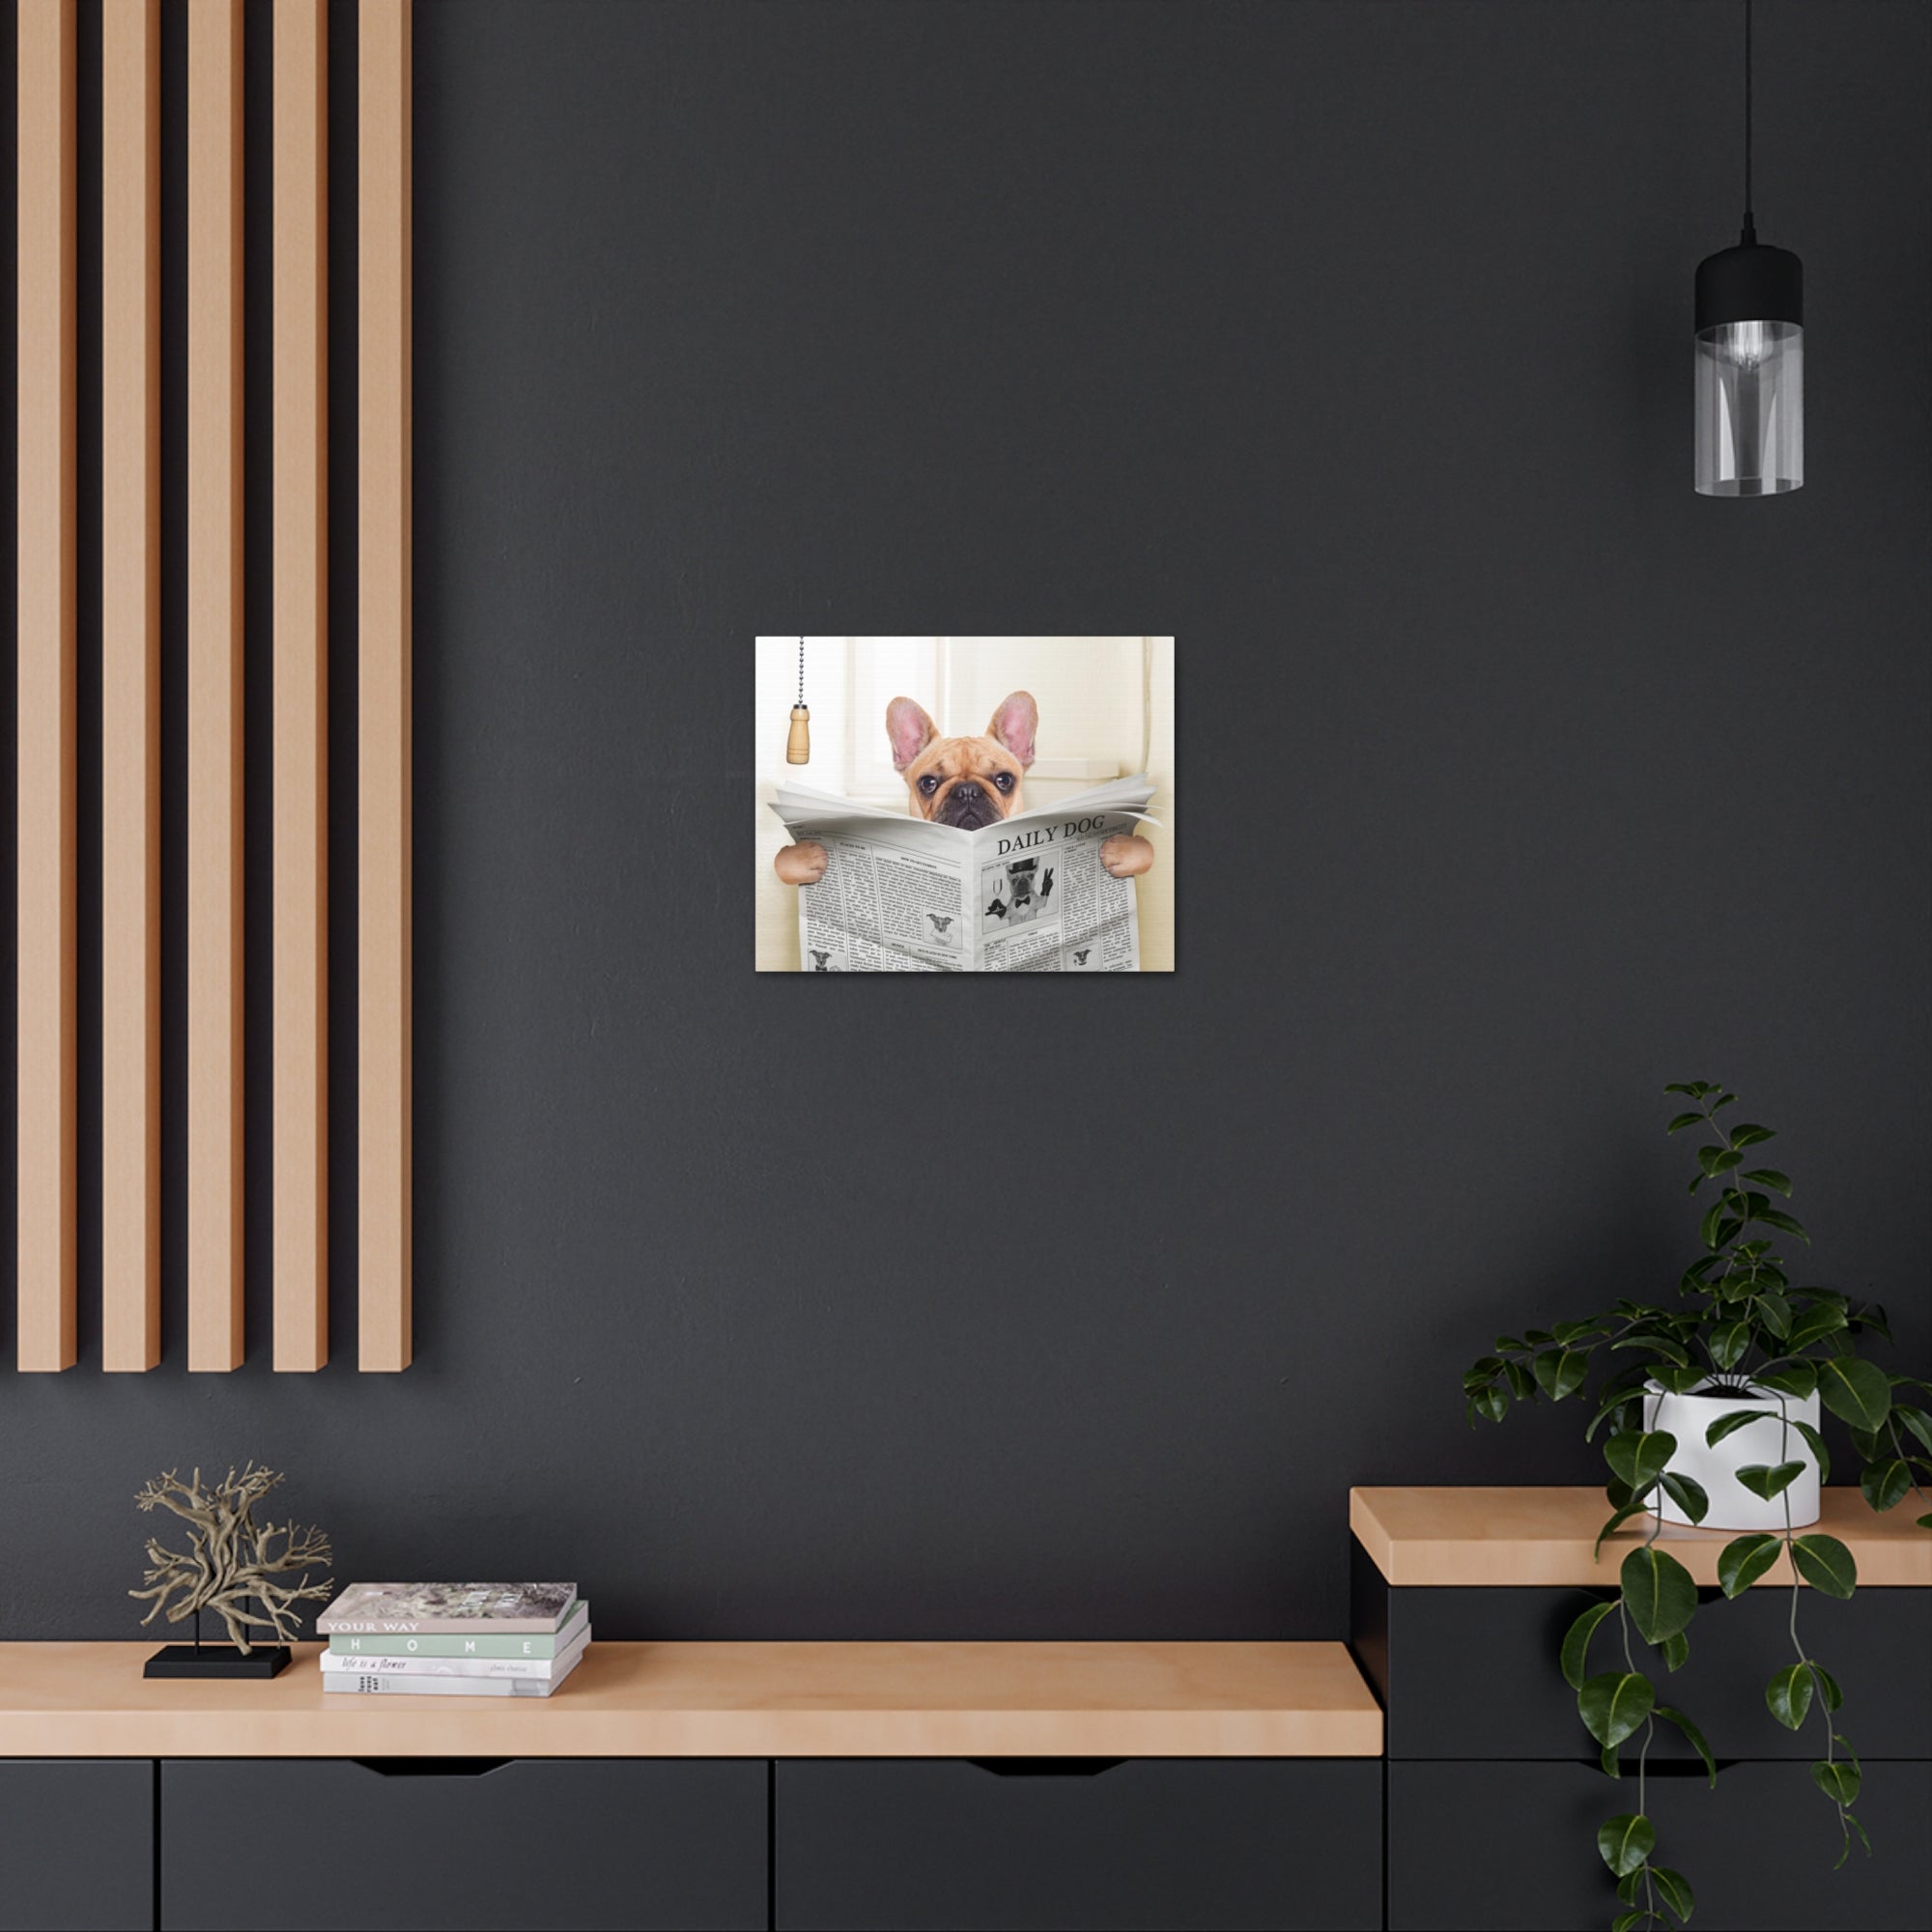 Fawn French Bulldog Reading Newspaper On Toilet Funny Canvas Wall Art for Home Decor Ready-to-Hand-Express Your Love Gifts